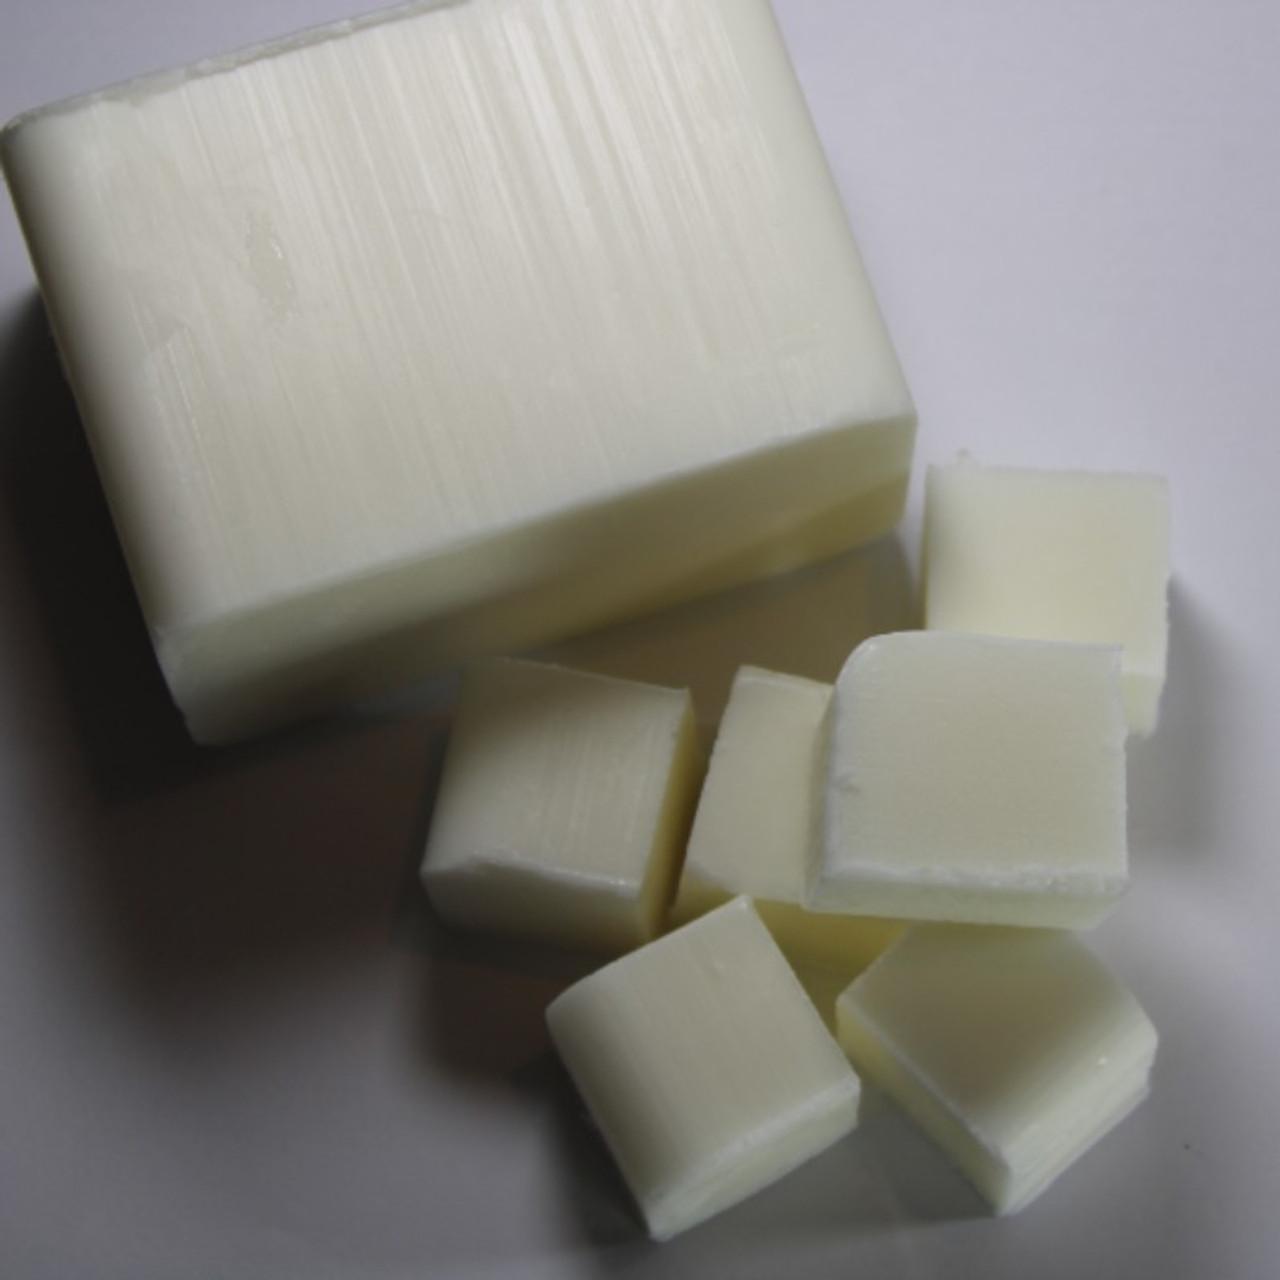 vherbs Shea Butter Soap Base Melt And Pour Soap-Base Clear Transparent Shea  Butter Base. at Rs 110/kilogram in Nagpur